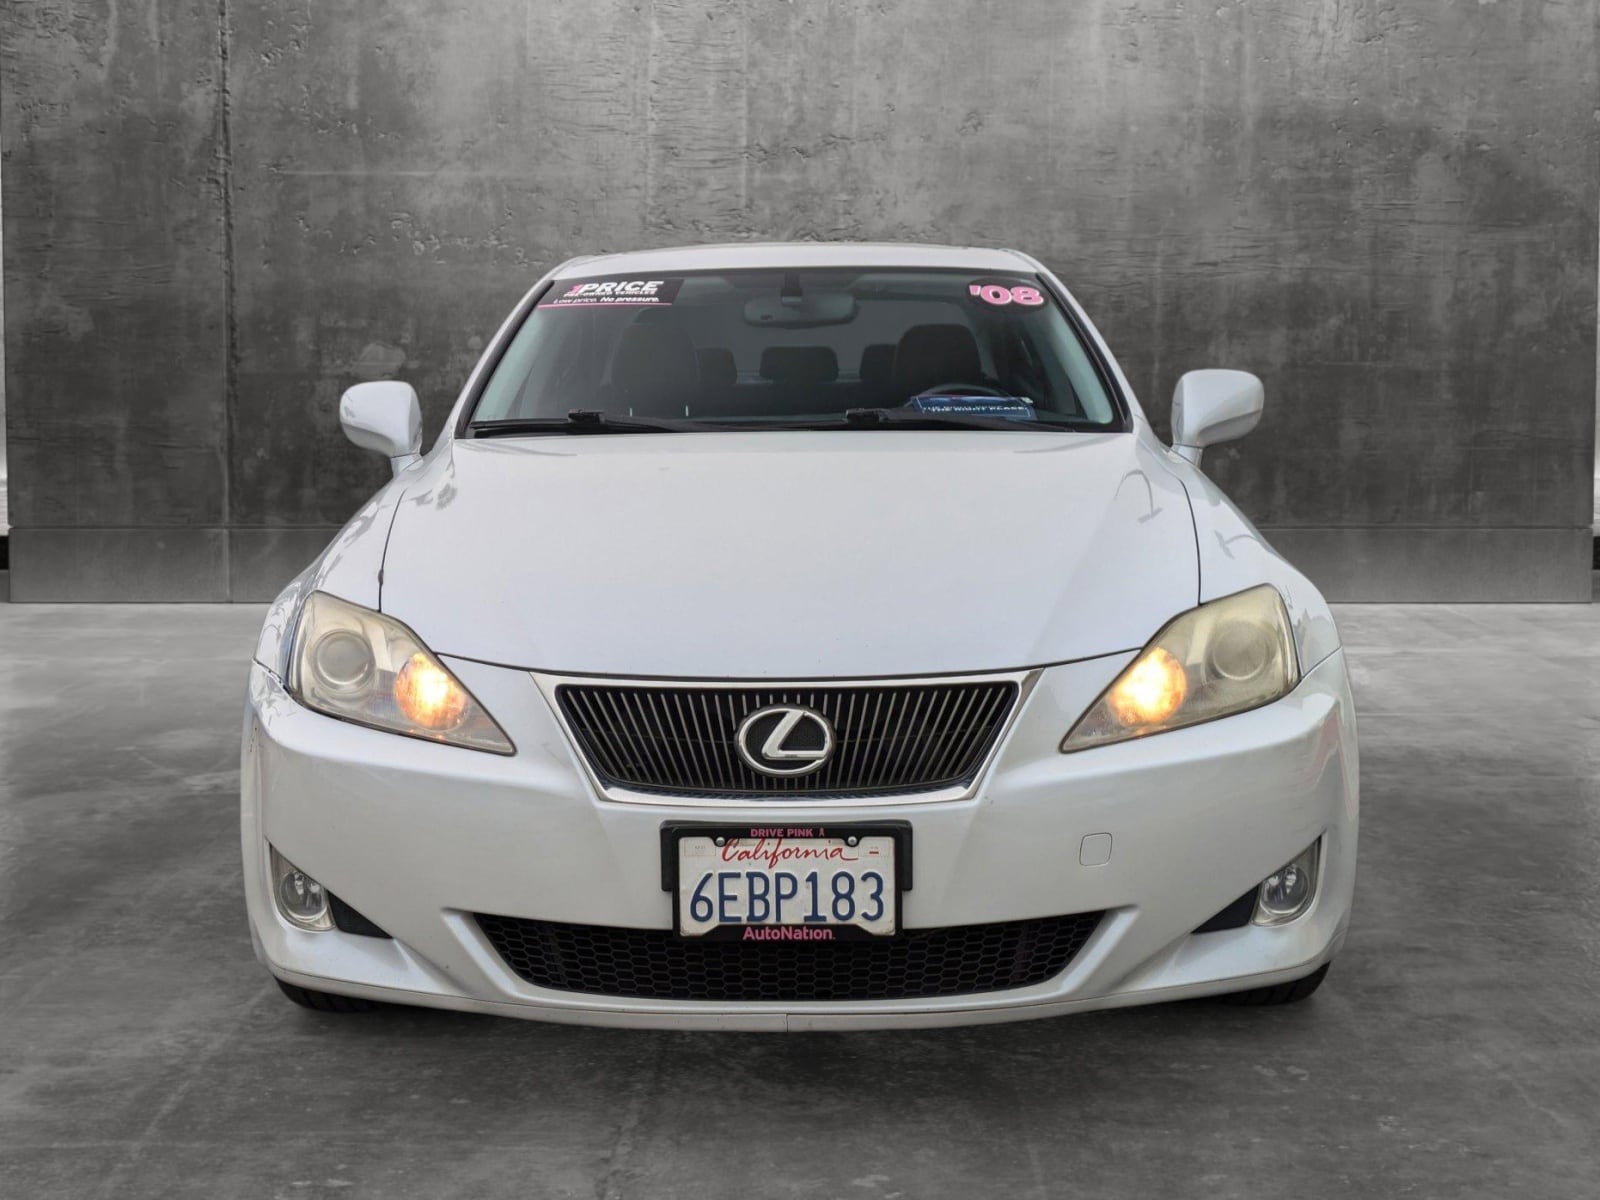 Used 2008 Lexus IS 250 with VIN JTHBK262882077740 for sale in Carlsbad, CA